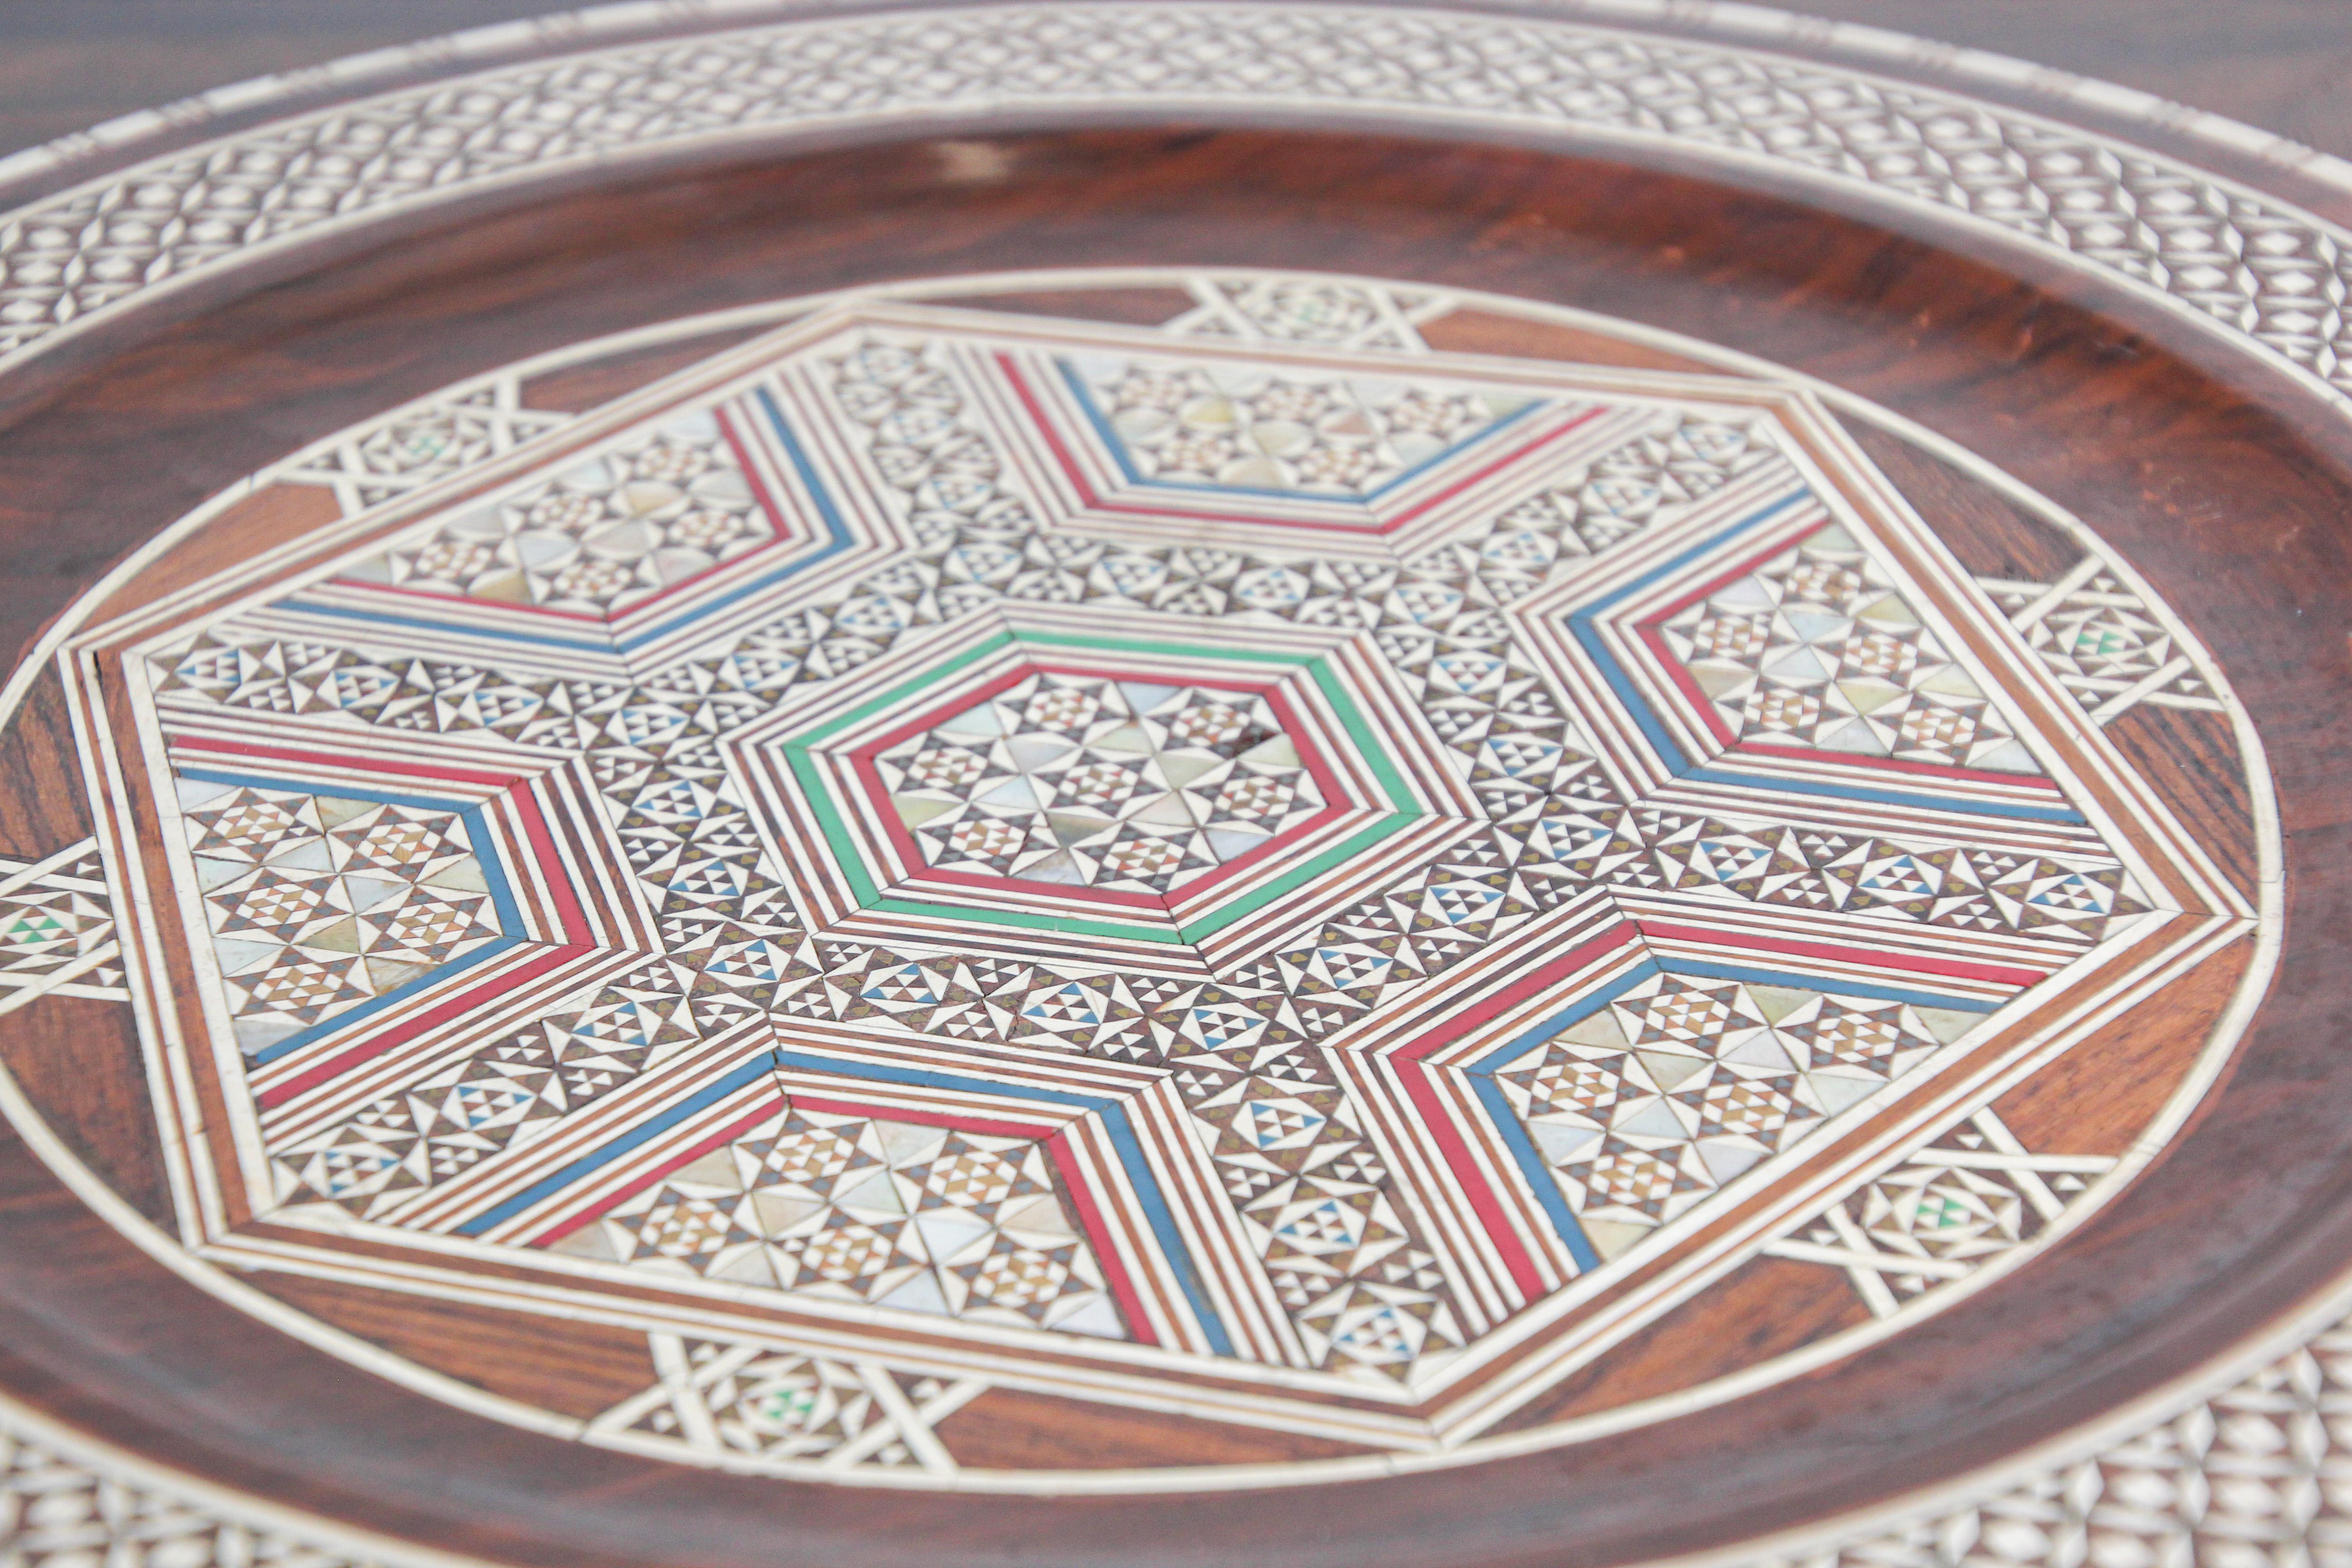 Middle Eastern Egyptian Inlaid Marquetry Decorative Platter In Good Condition For Sale In North Hollywood, CA